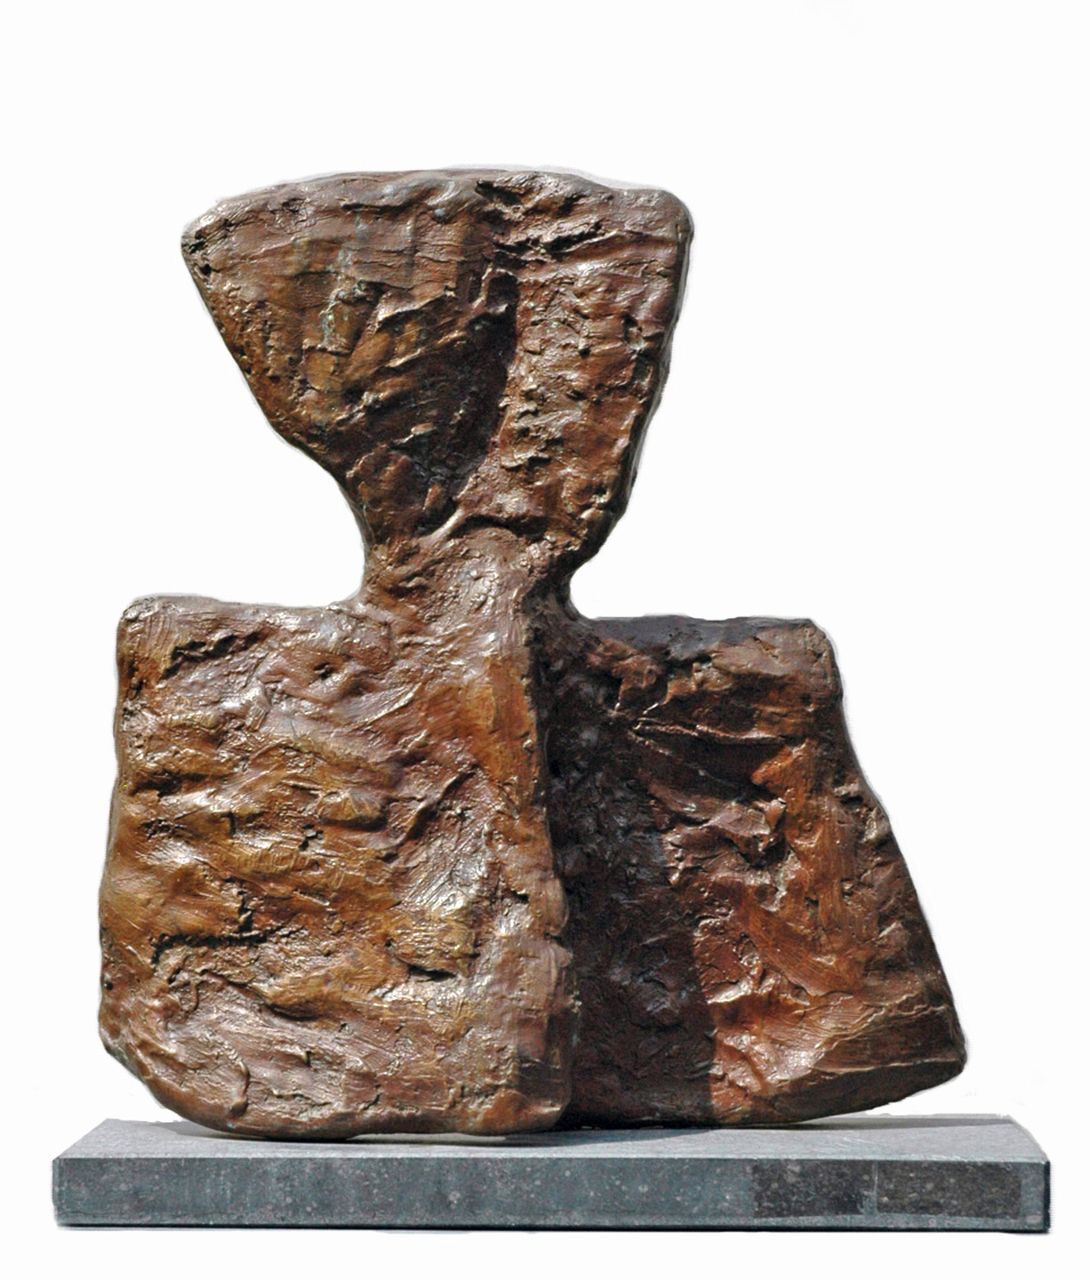 LeRoy A.  | Antoinette LeRoy, Figure in the wind, bronze 38.0 x 32.0 cm, signed with initials on lower side.